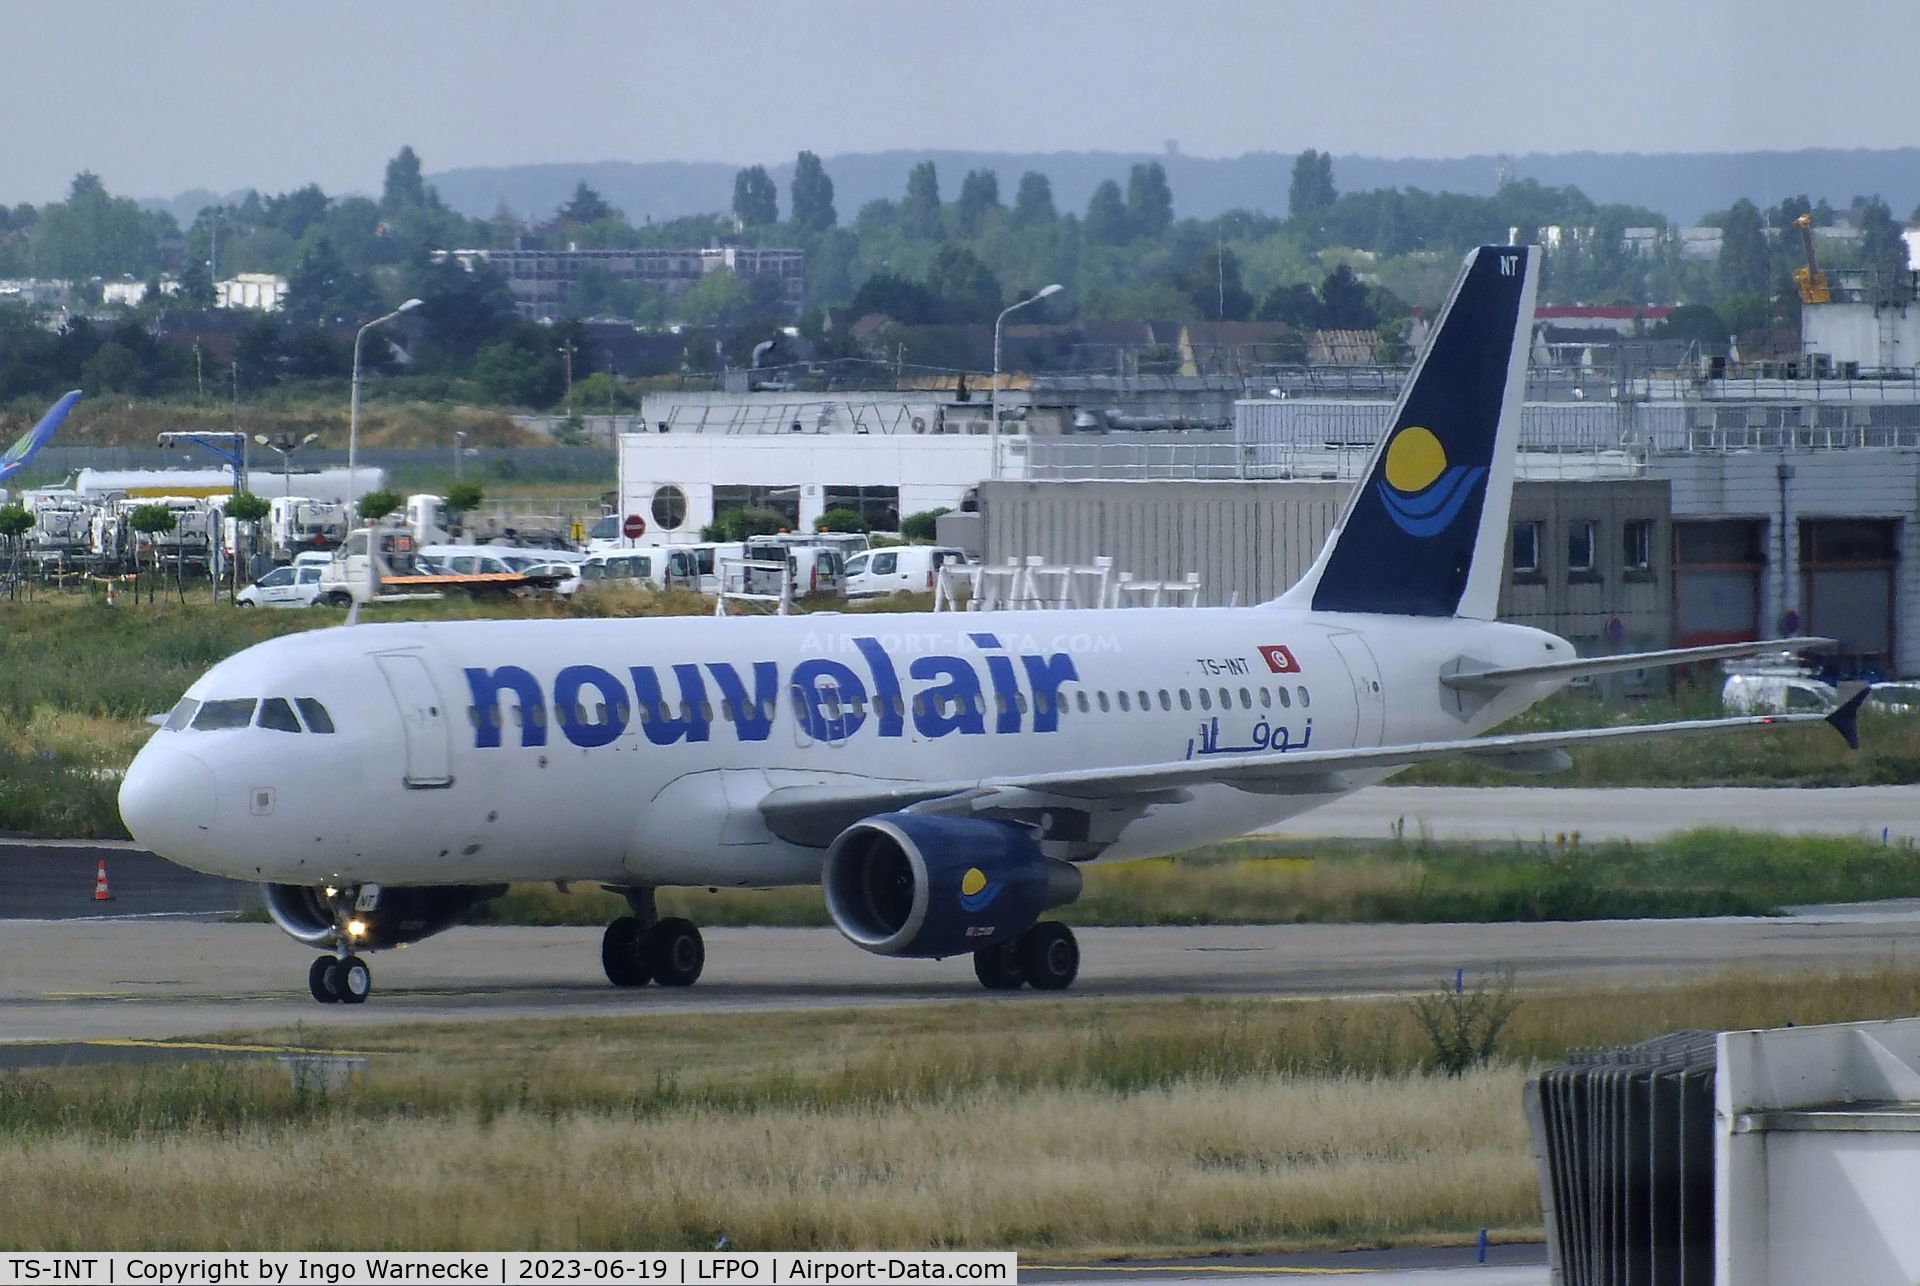 TS-INT, 2009 Airbus A320-214 C/N 3798, Airbus A320-214 of nouvelair of at Paris/Orly airport